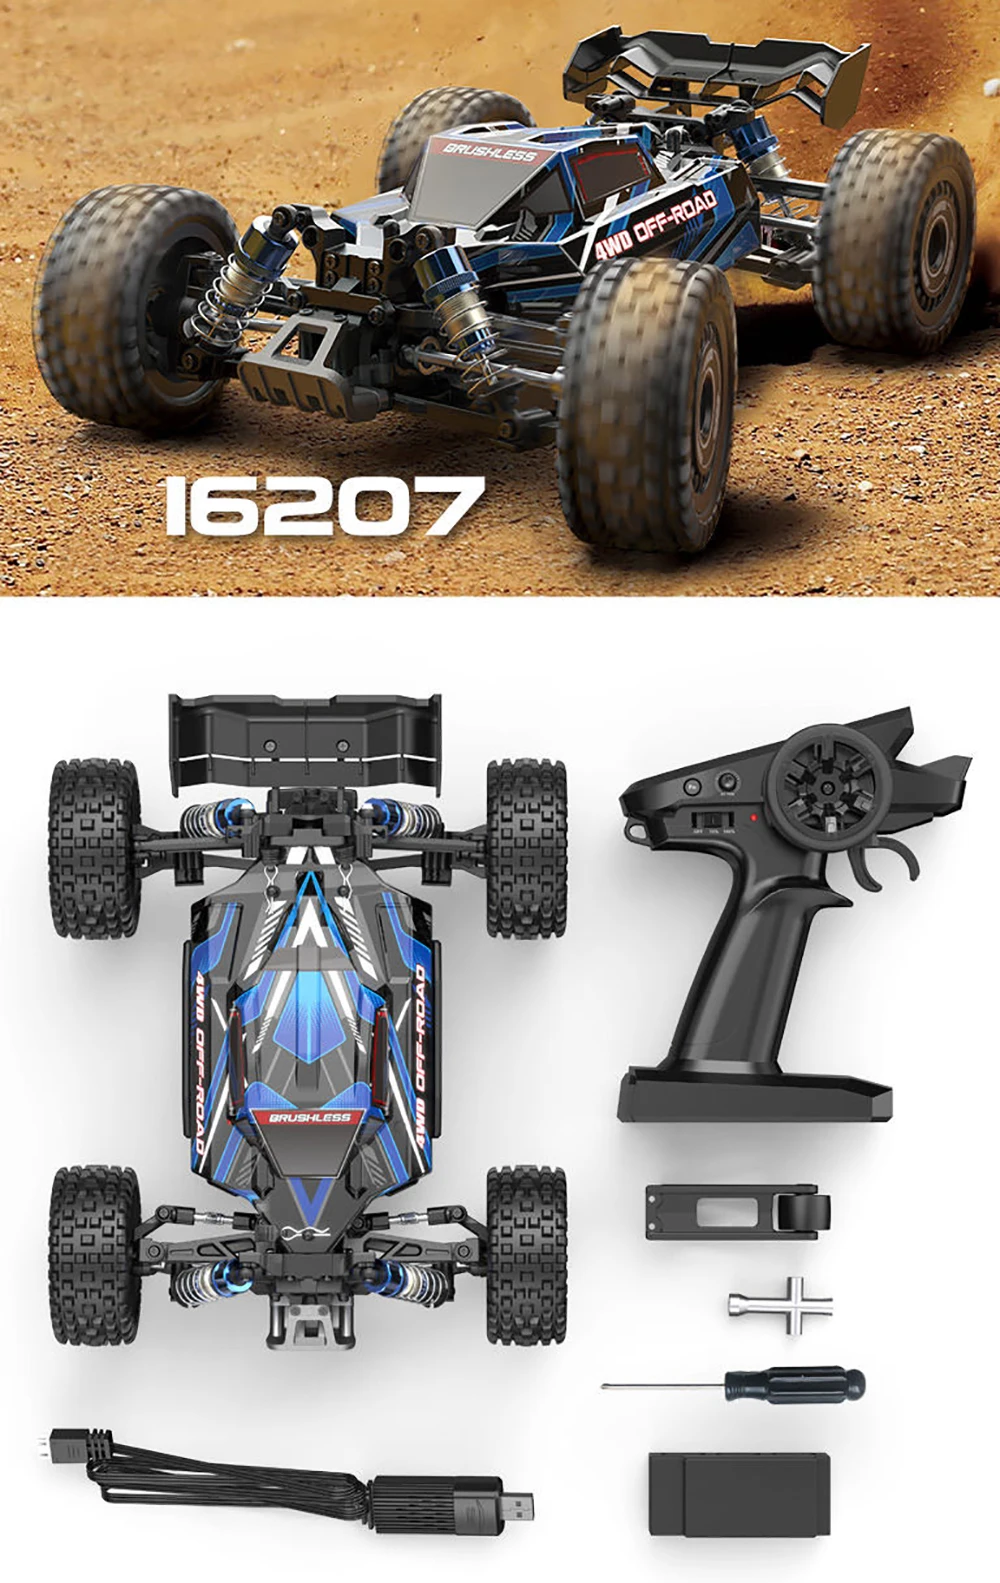 HOSHI MJX 16207 RC Cars Hyper Go 1/16 Brushless RC 4WD 65KM/H rc monster truck high speed Off-Road Buggy Car